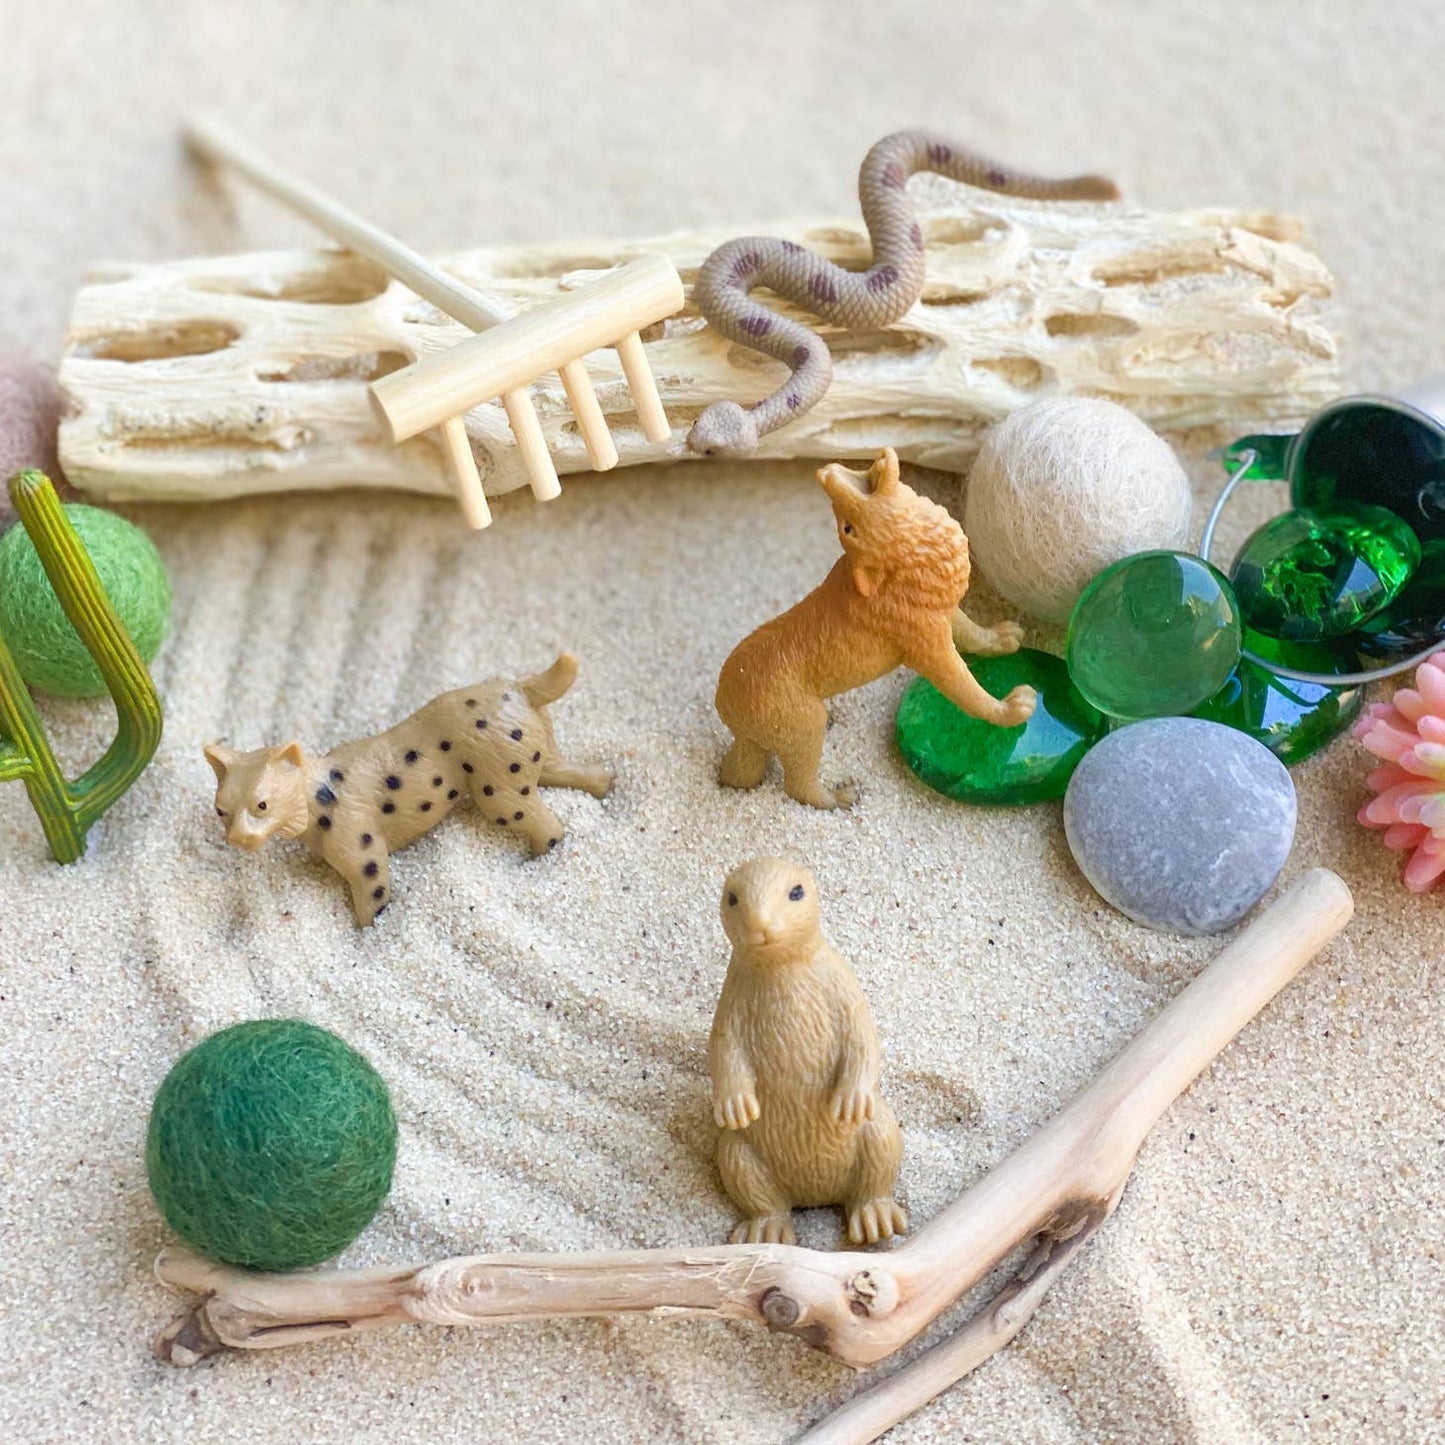 casita curated play sensory kit / Sparkly red play sand is accompanied by a wooden sand rake, authentic cholla and driftwood. Four animals, cactus and felt balls complete the scene.